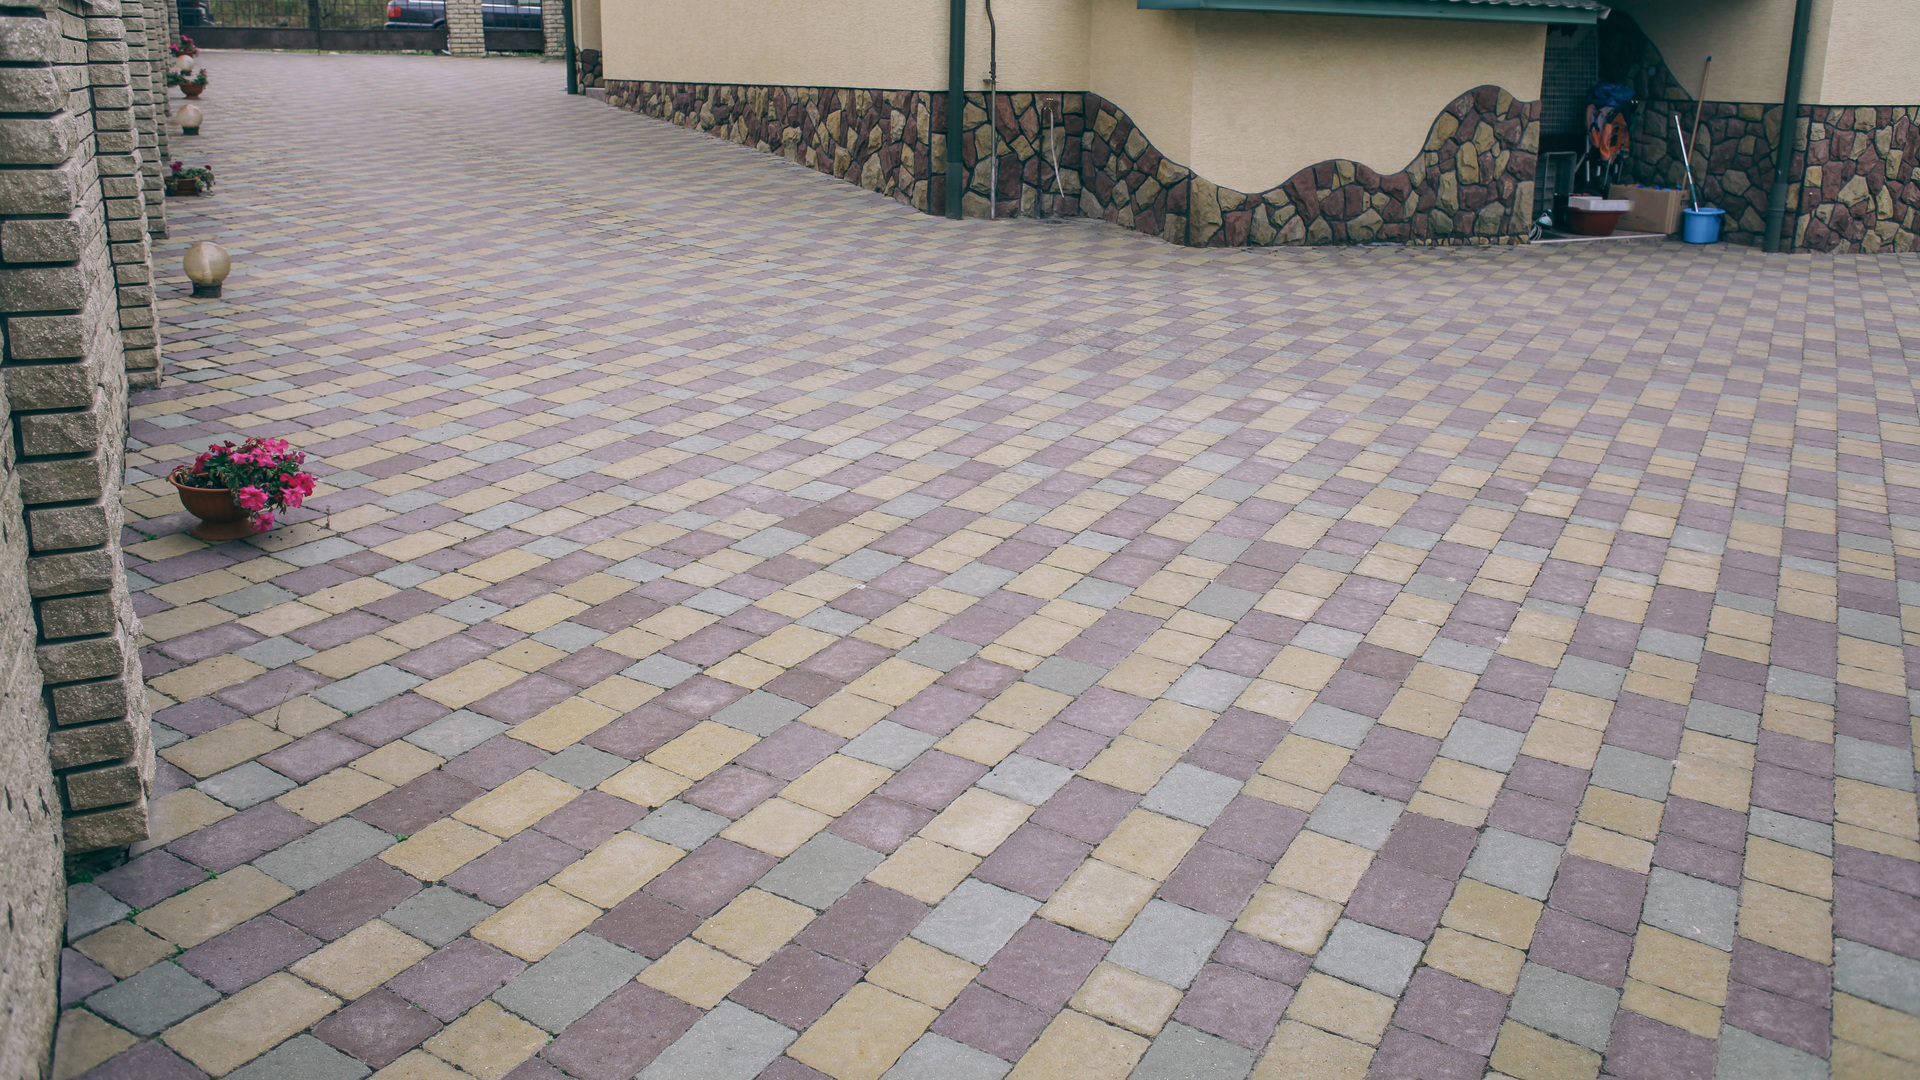 5 Eye-Catching Paver Patterns to Consider Using for Your New Driveway!